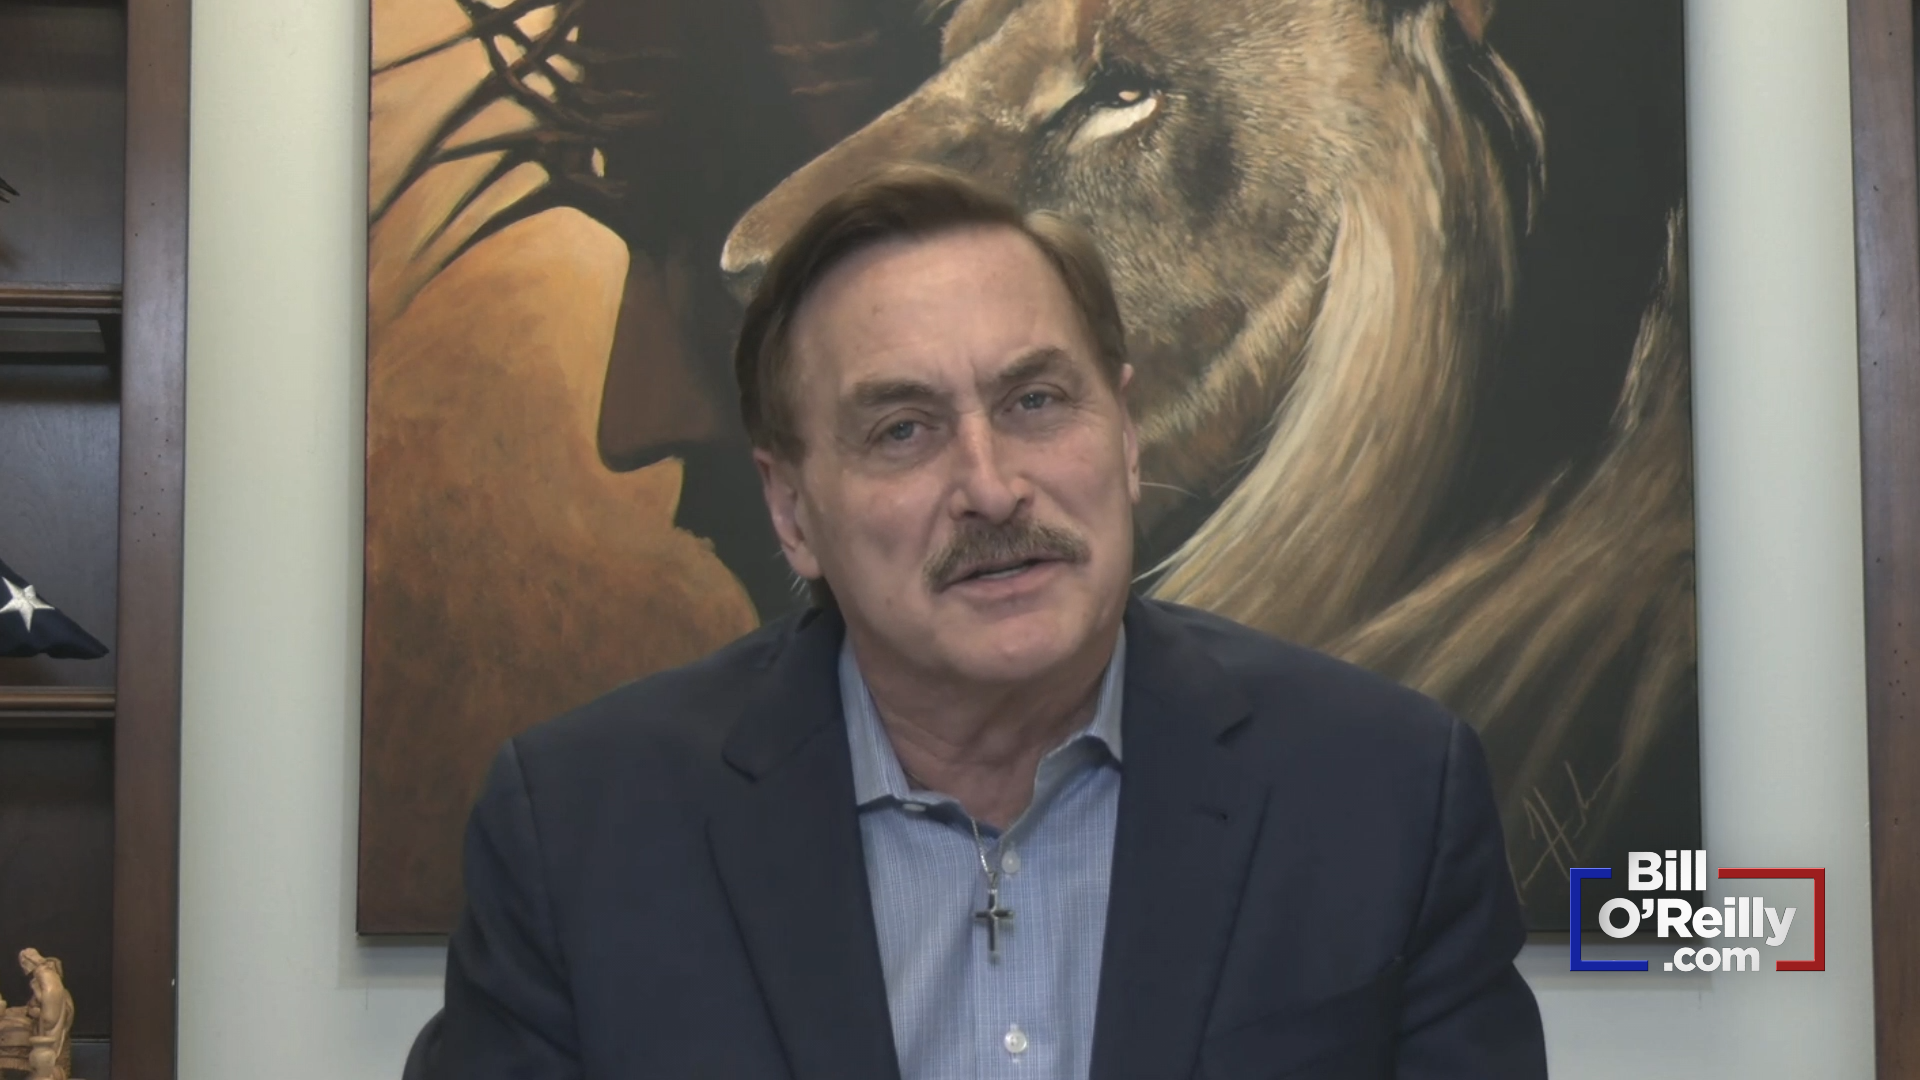 Mike Lindell on the 2020 Election